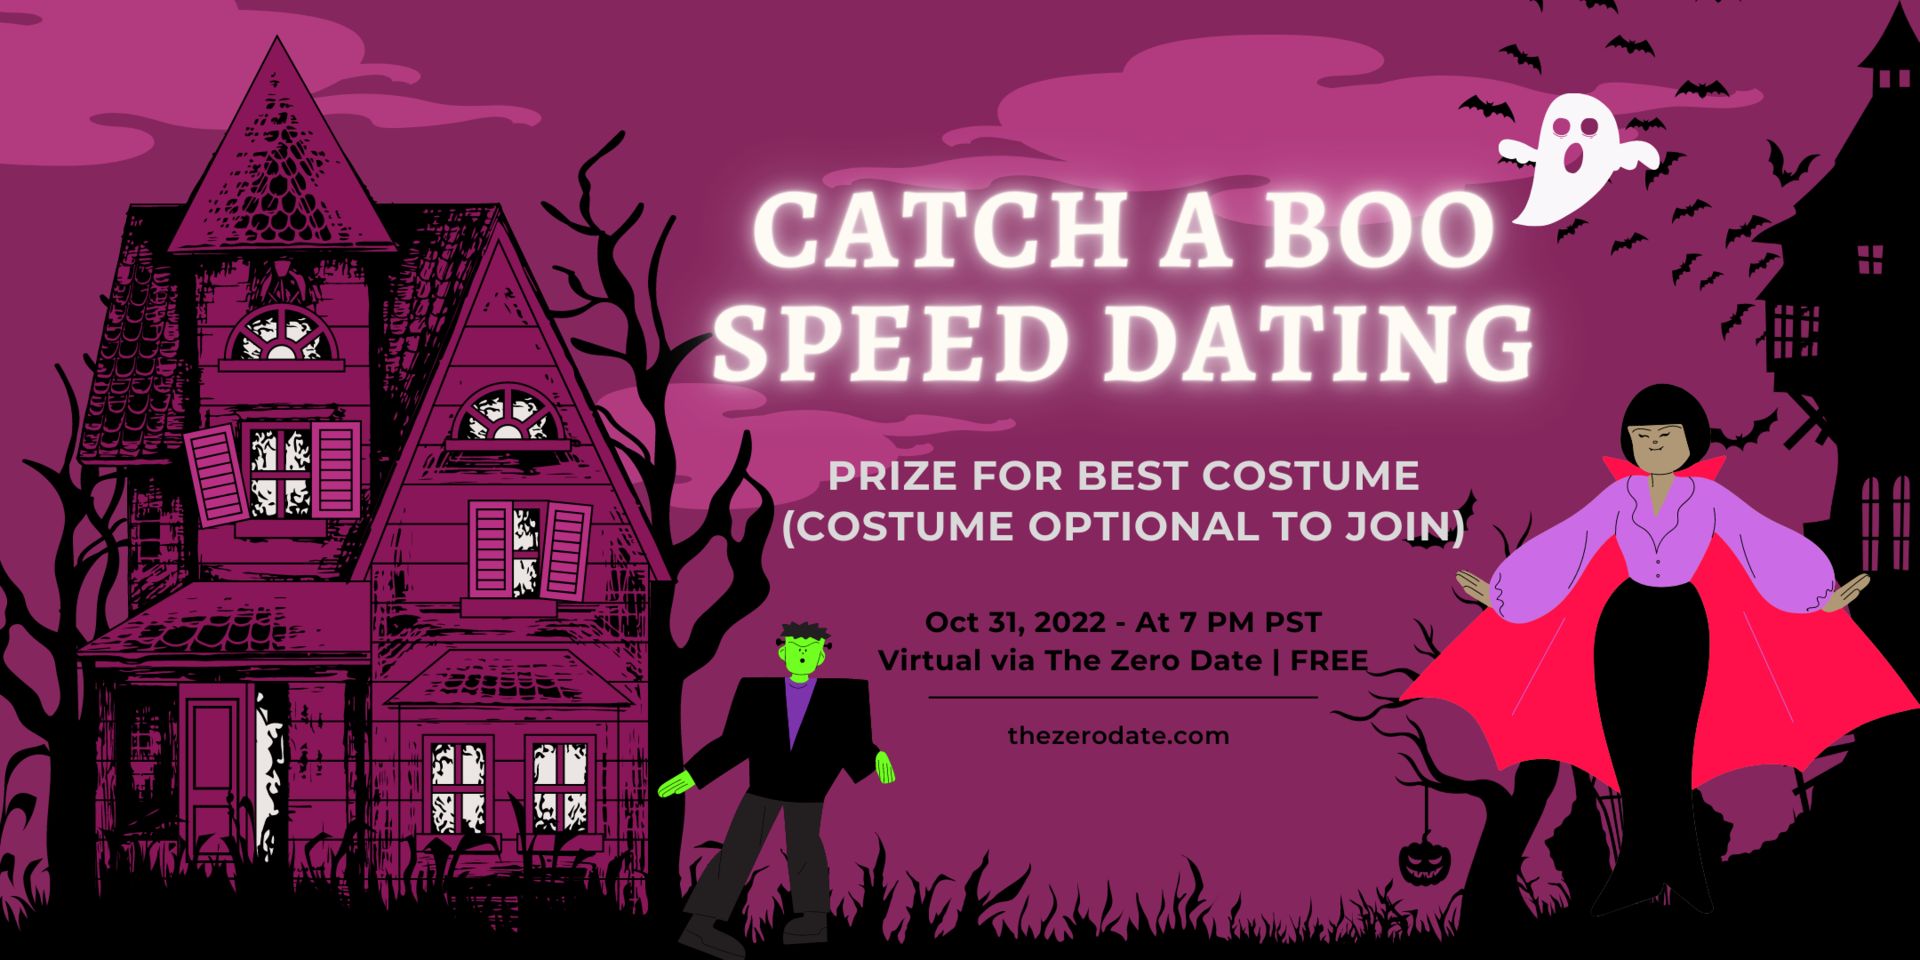 Catch a Boo This Halloween: Video Speed Dating Event (free), Online Event